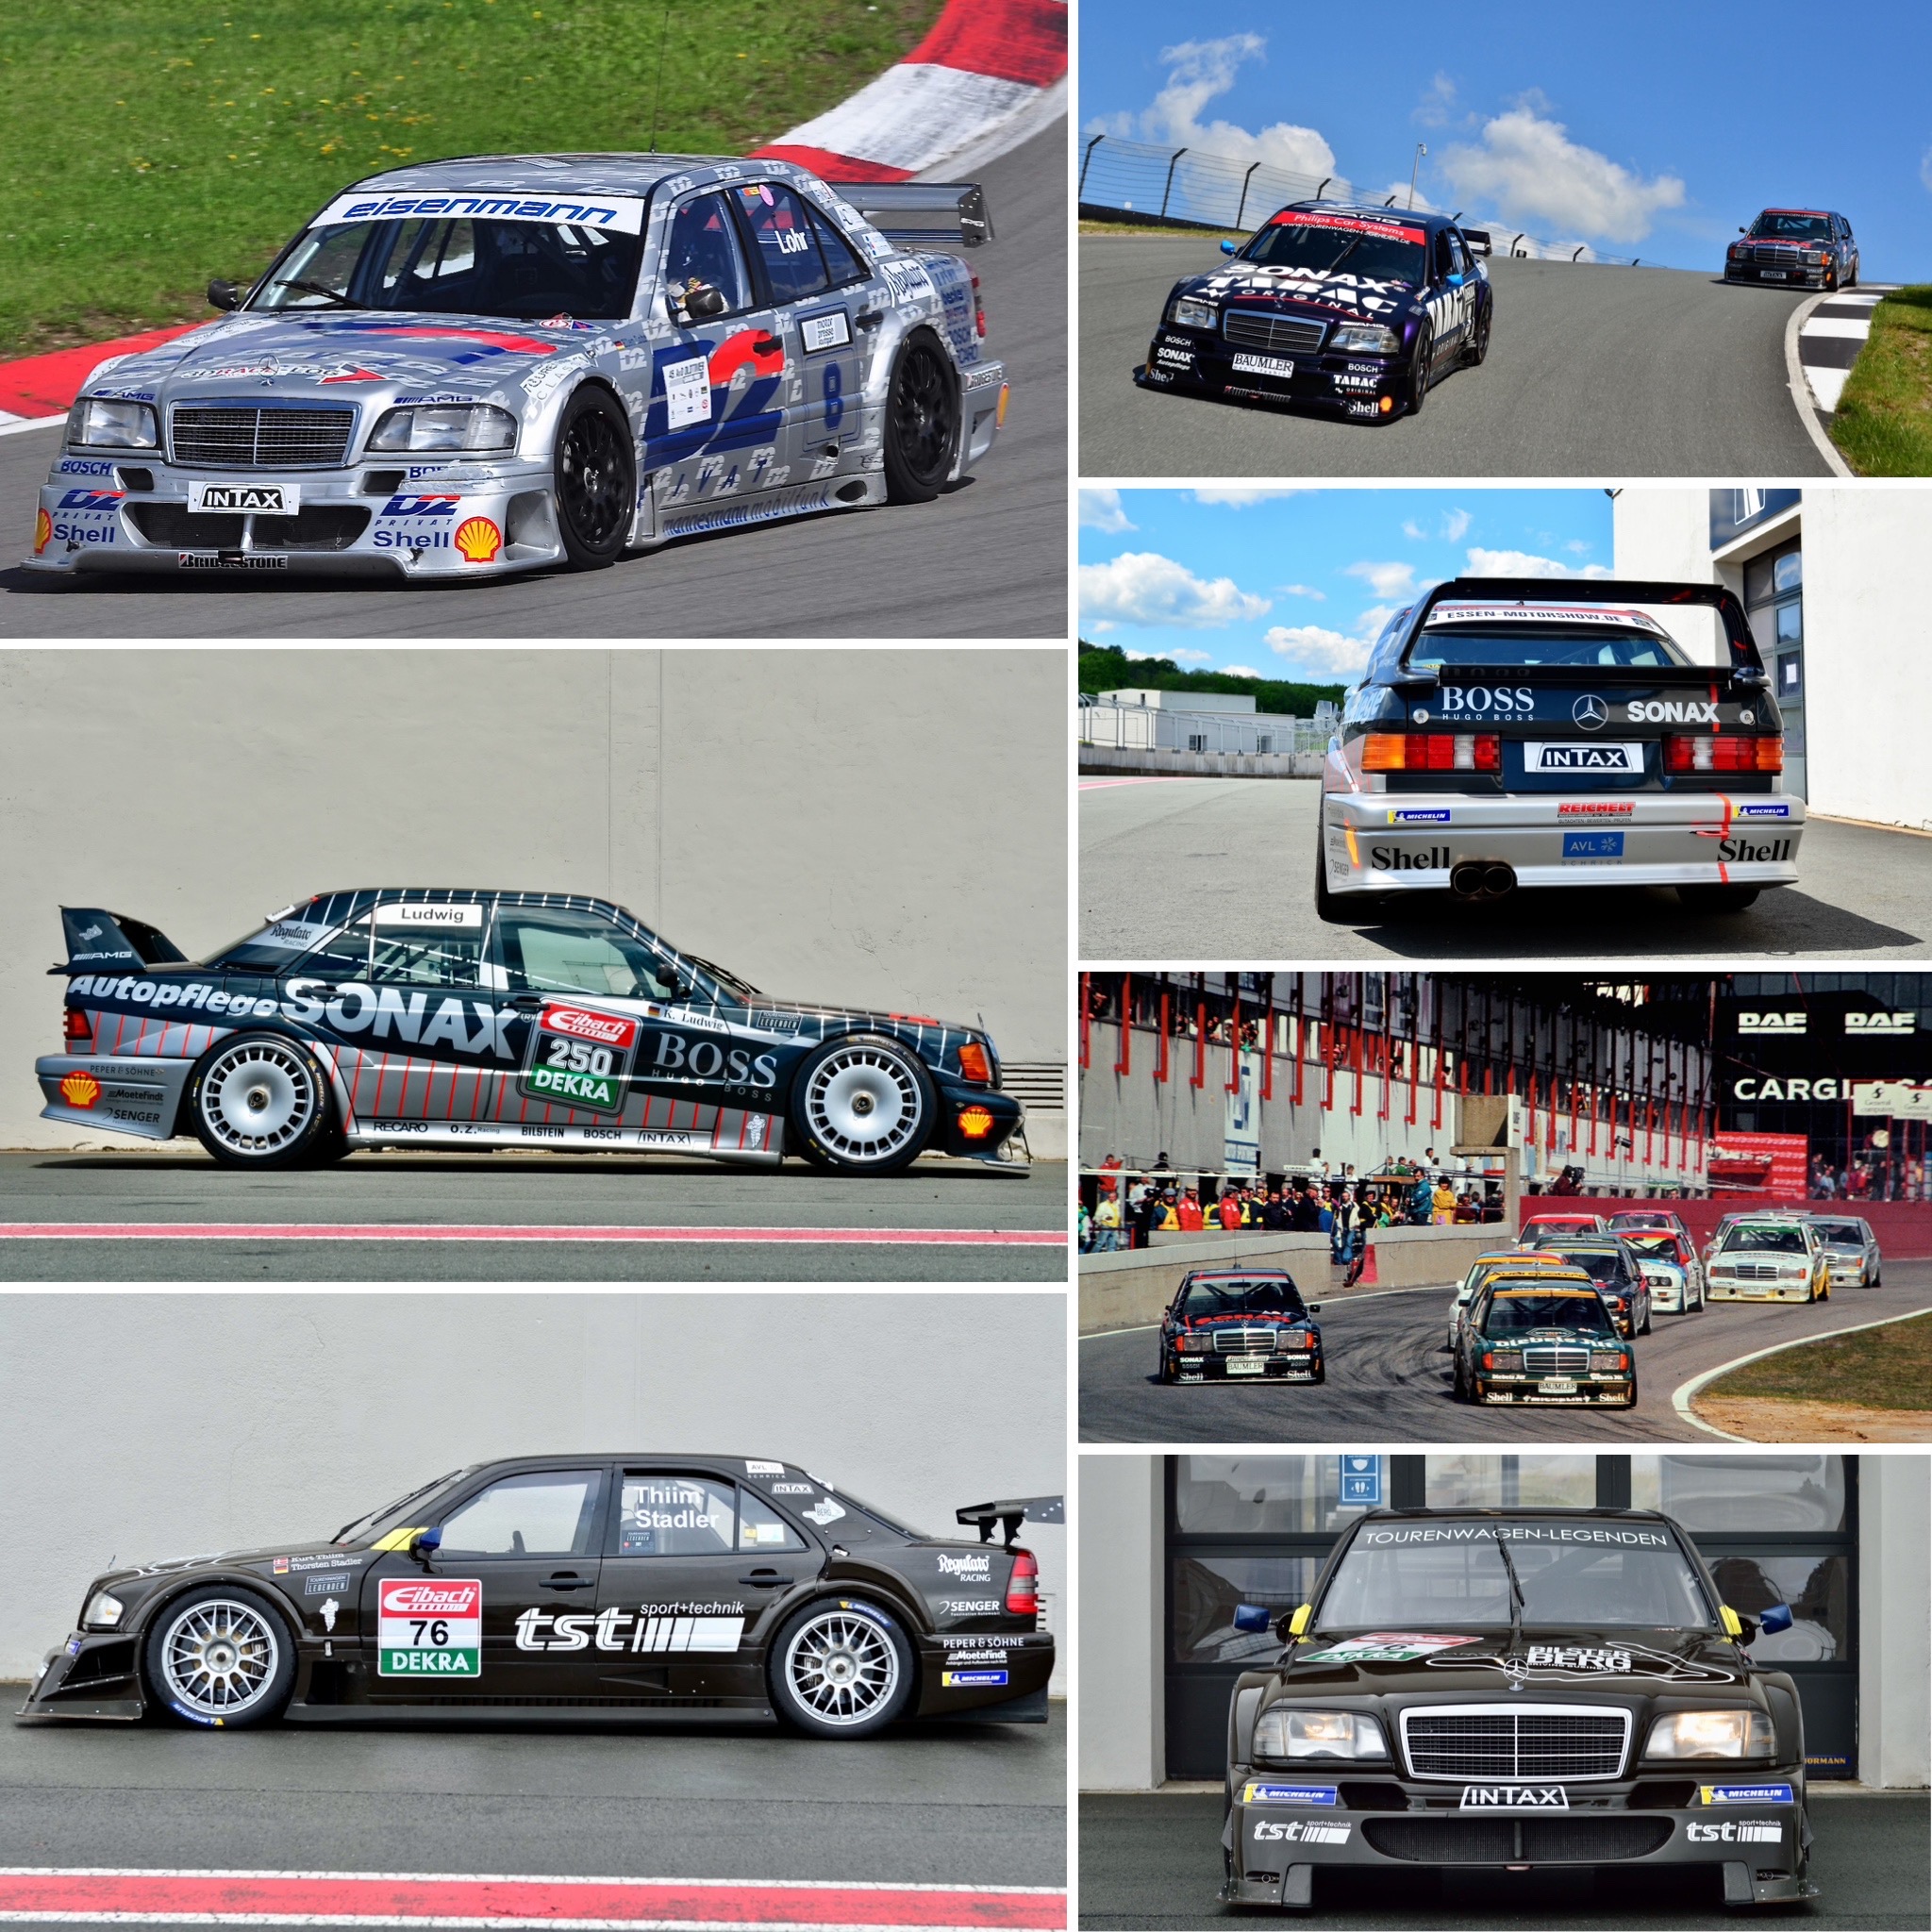 Now on offer @racecarsdirect.com: Mercedes-Benz DTM-racecars from 1989 to 1996 for sale.